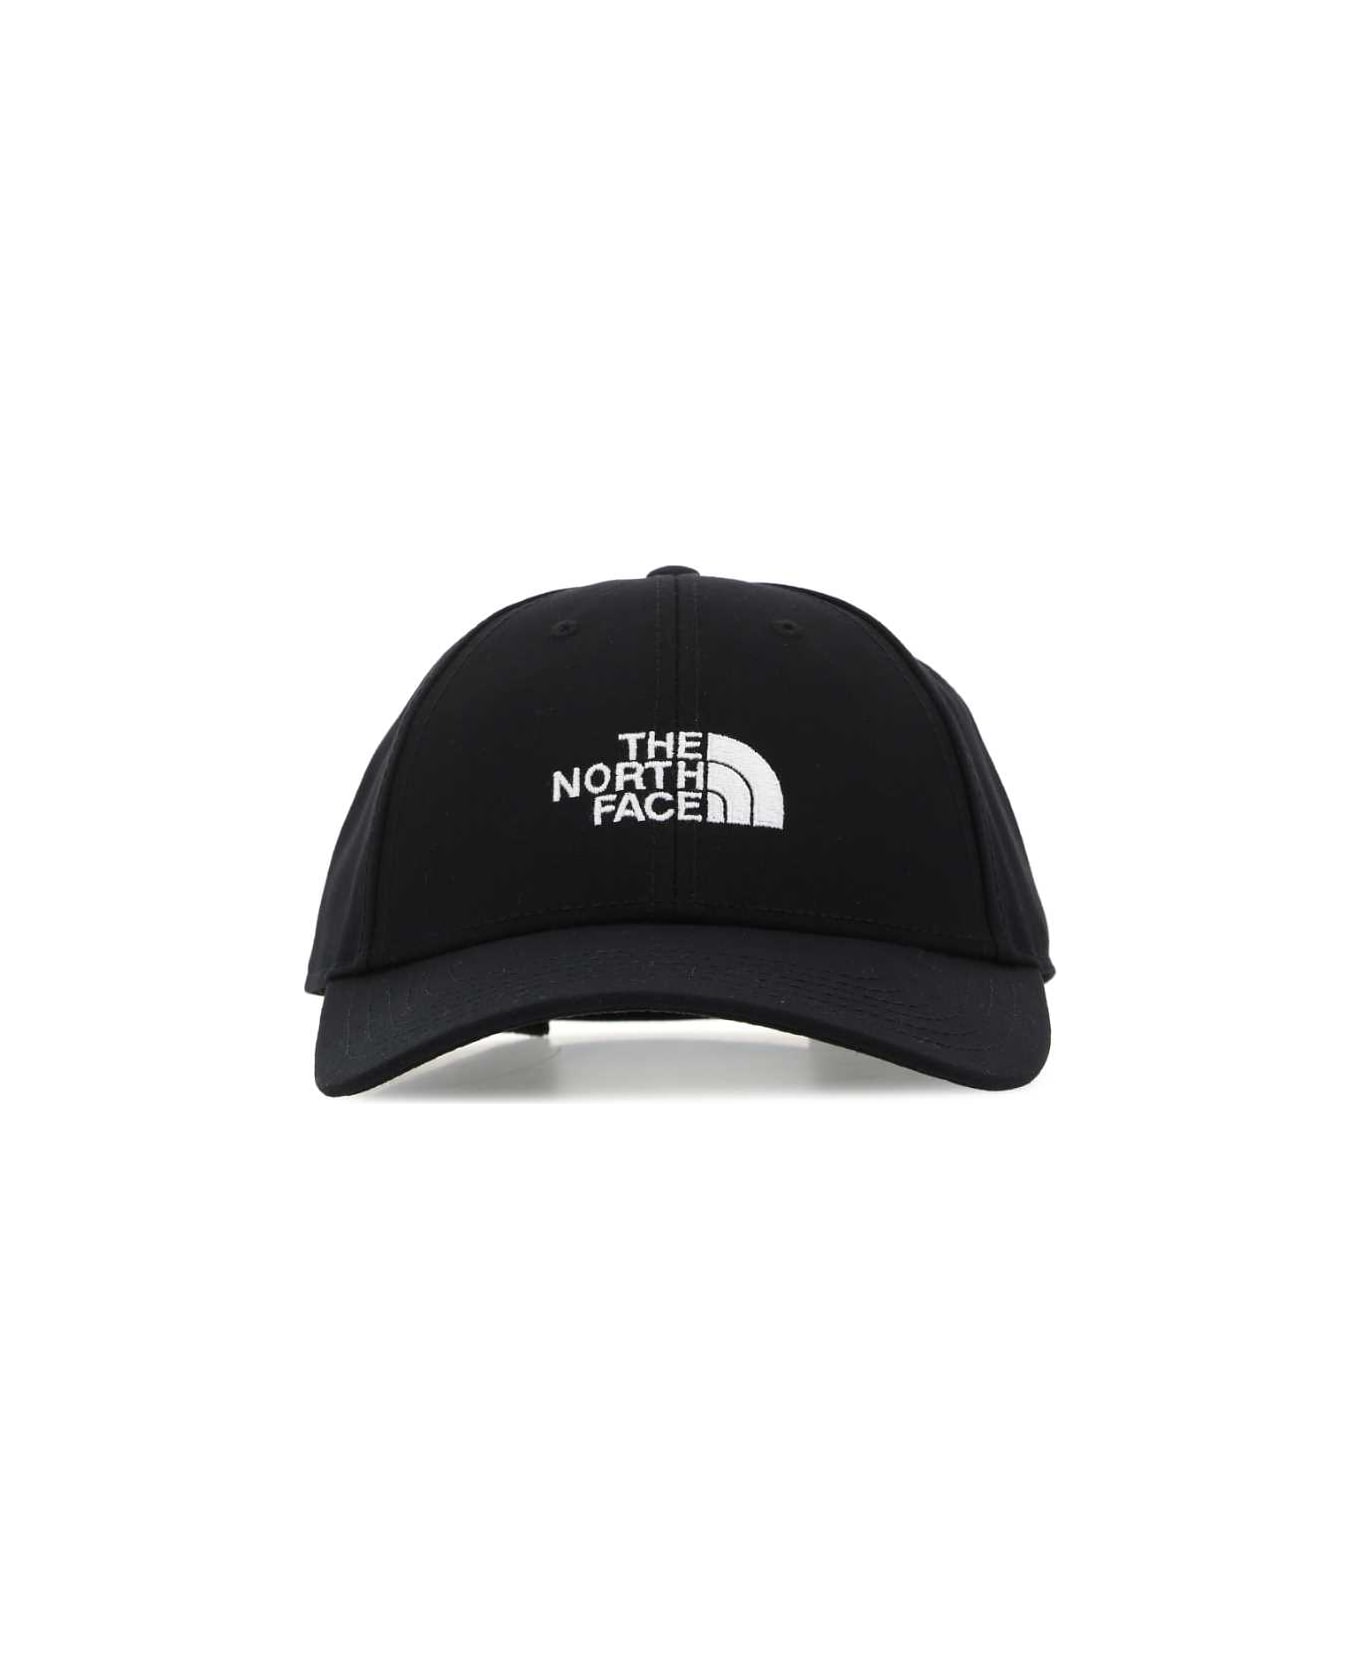 The North Face Black Polyester Baseball Cap - KY41